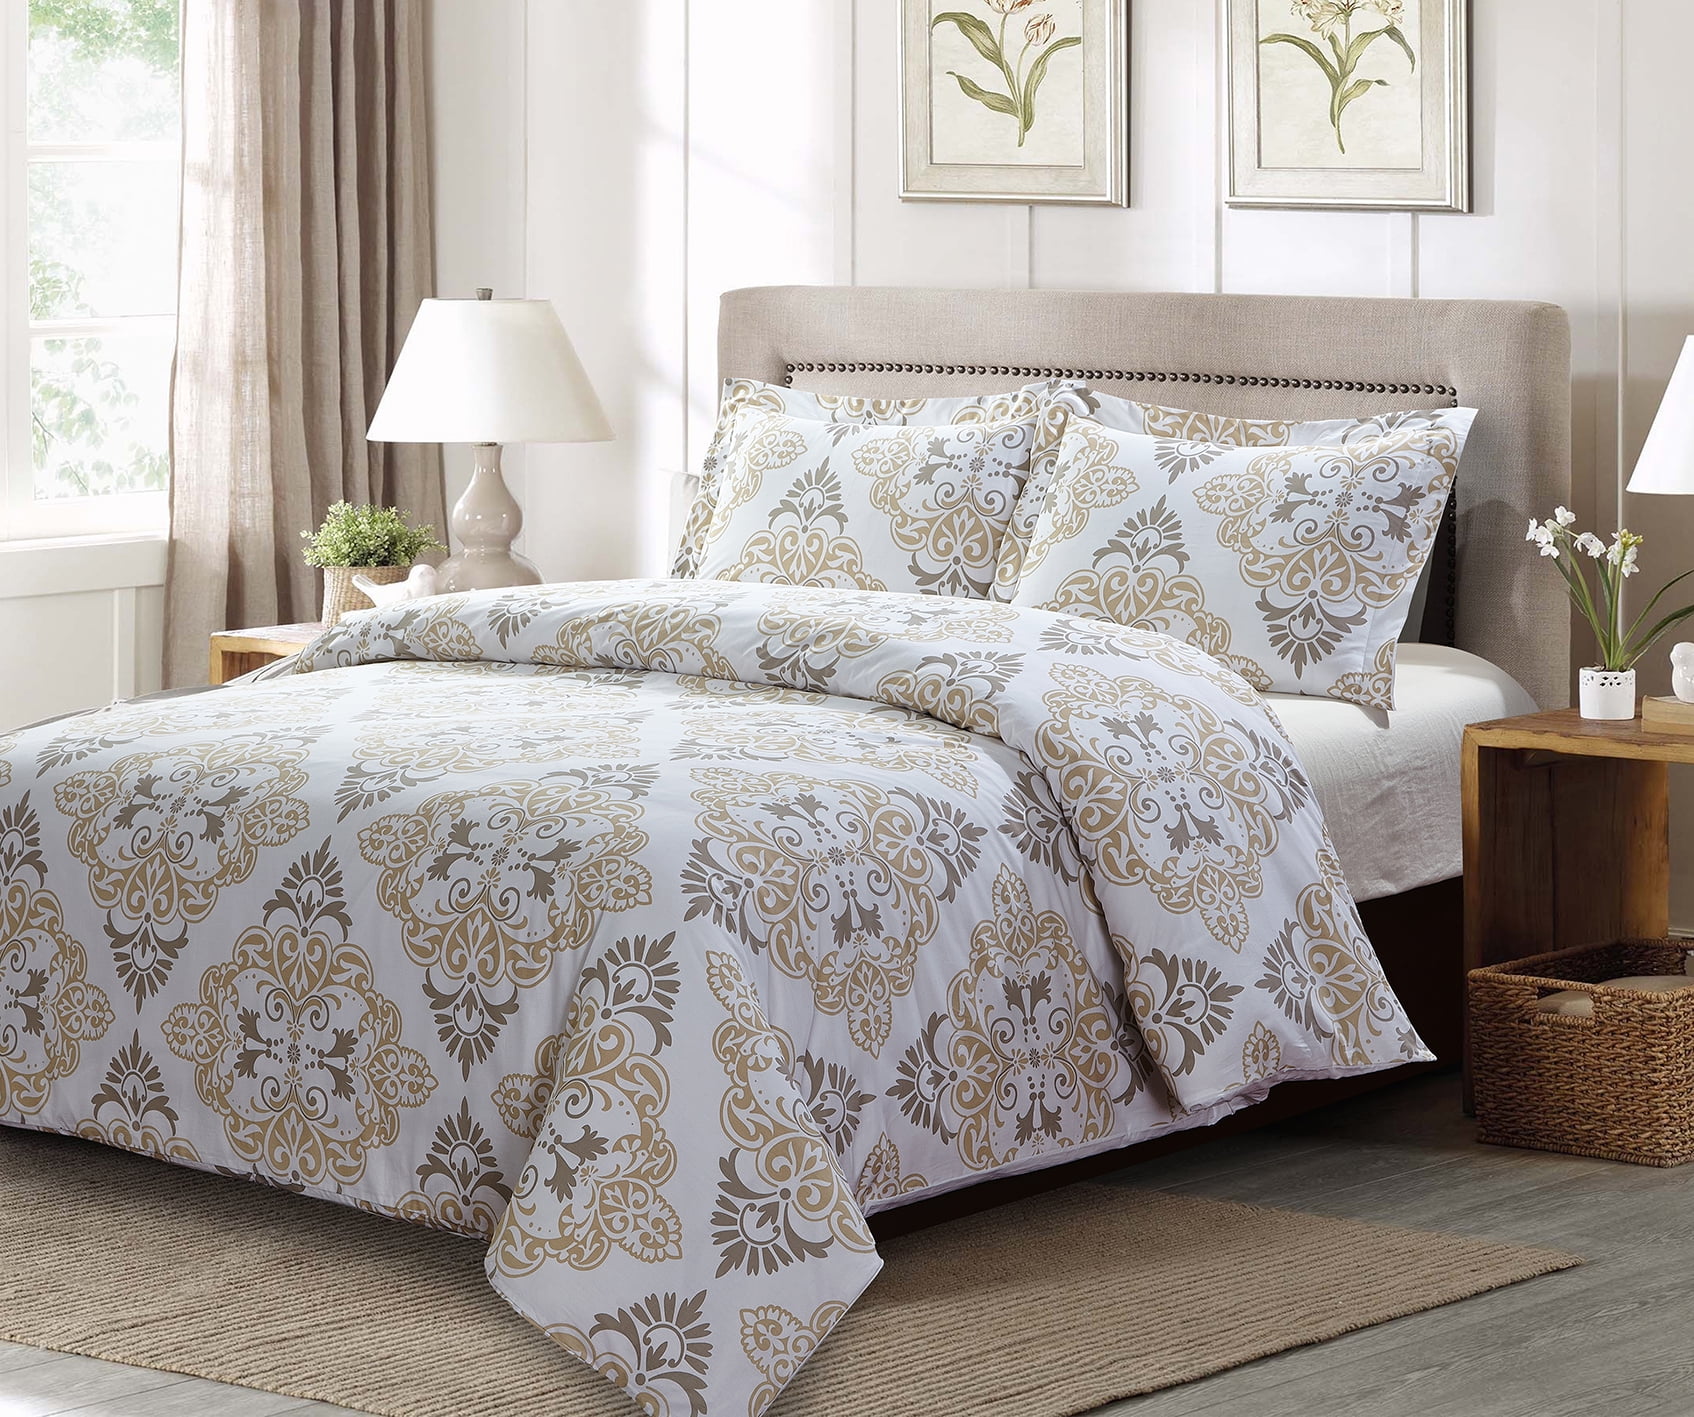 Sibley 3pc 100% Cotton Gray and Taupe Damask Print Duvet Cover Set ...